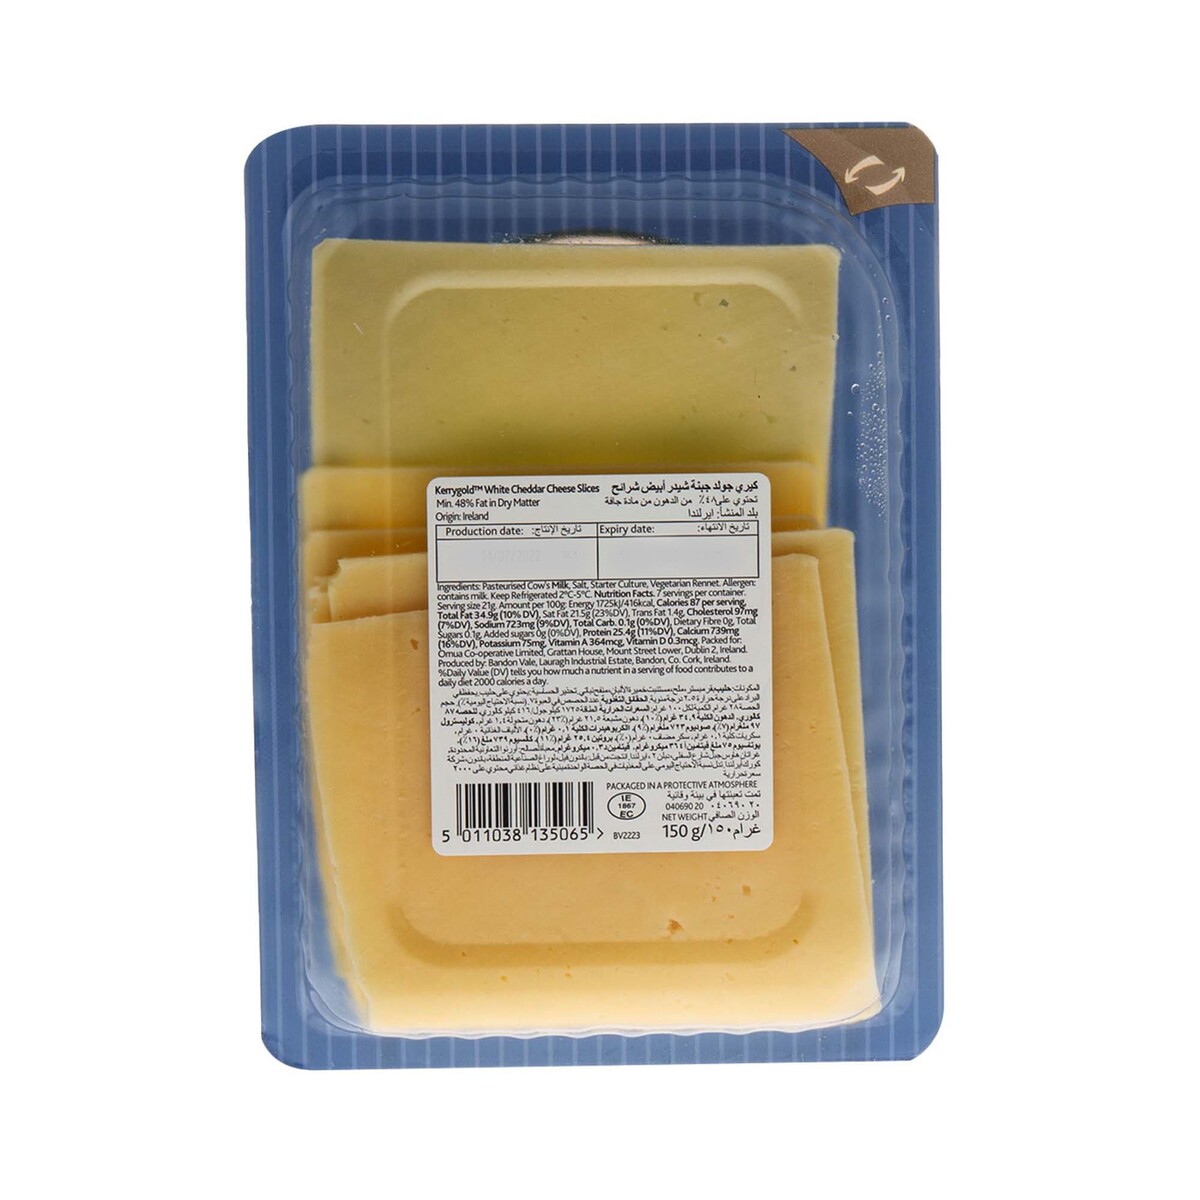 Kerry Gold Cheddar Mild Cheese 150 g